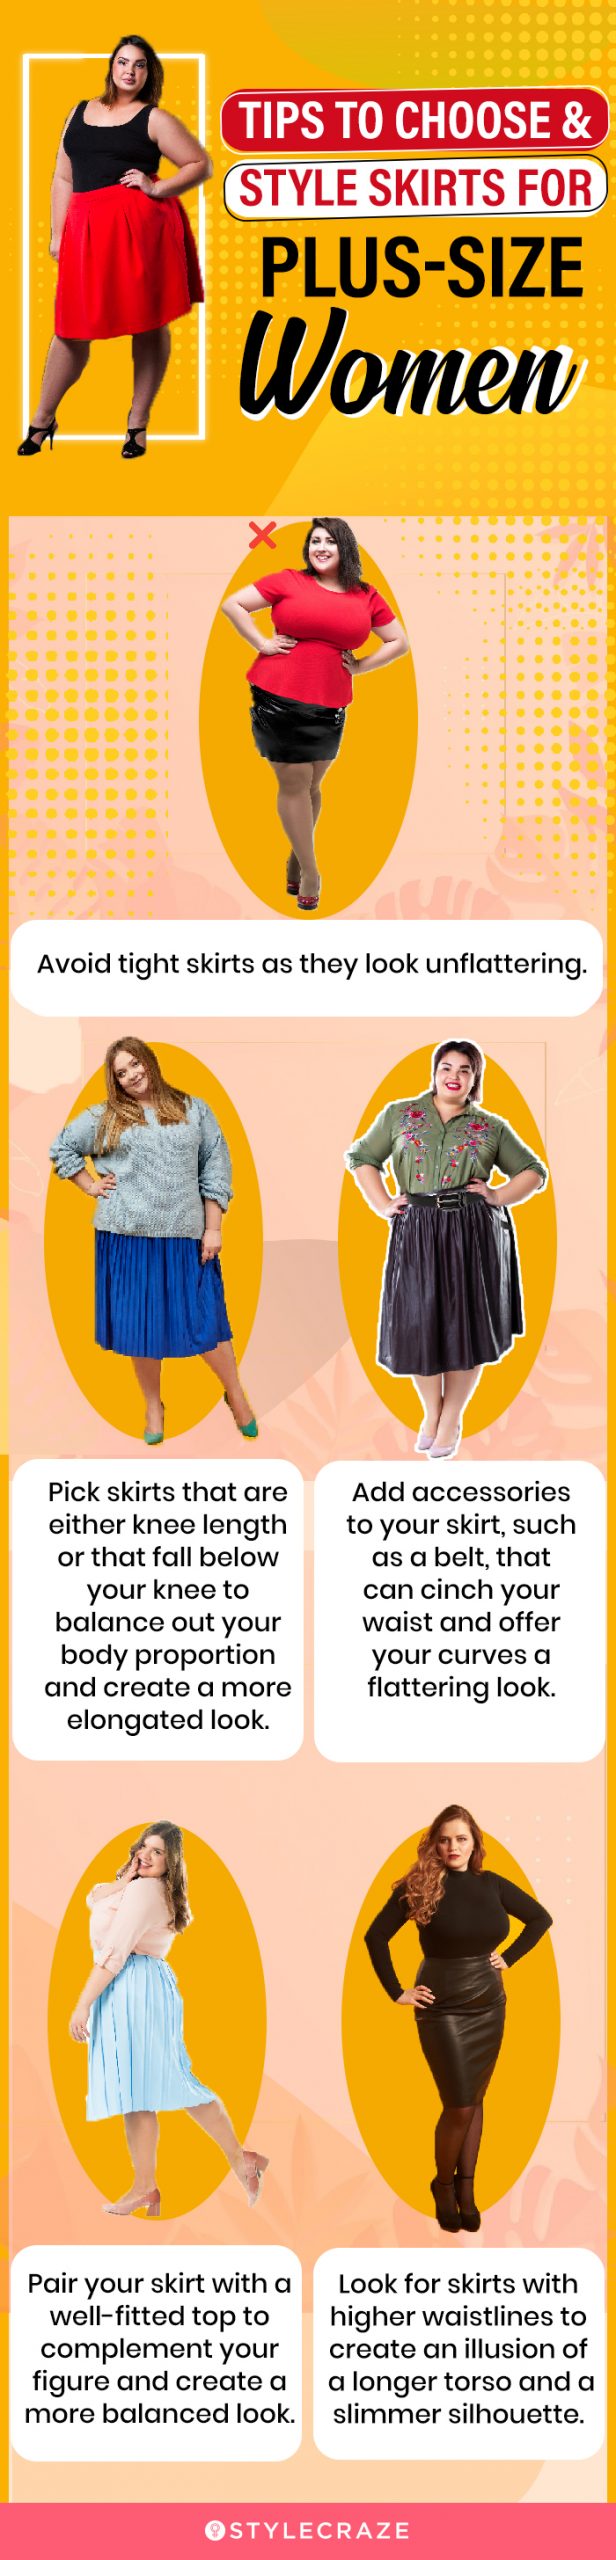 Tips To Choose & Style Skirts For Plus-Size Women (infographic)